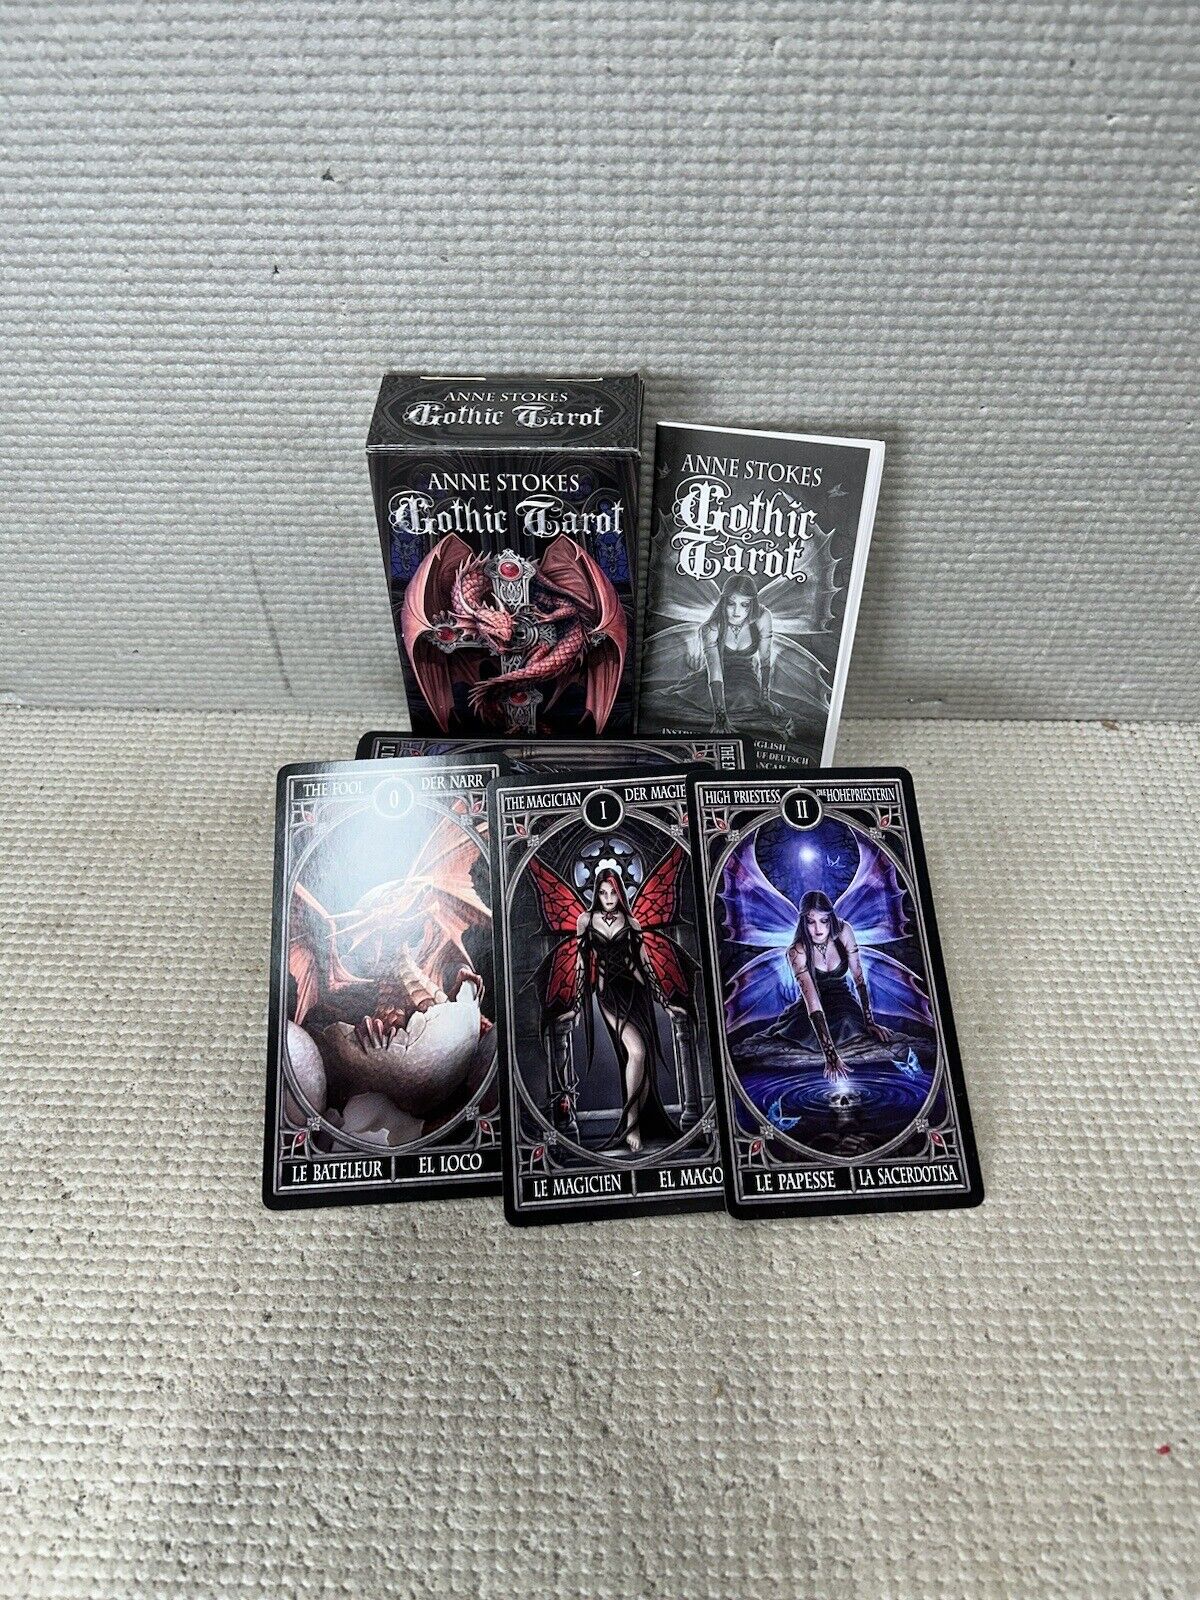 Anne Stokes Gothic Tarot Card Set Fournier Made In Spain Complete Beautiful Art